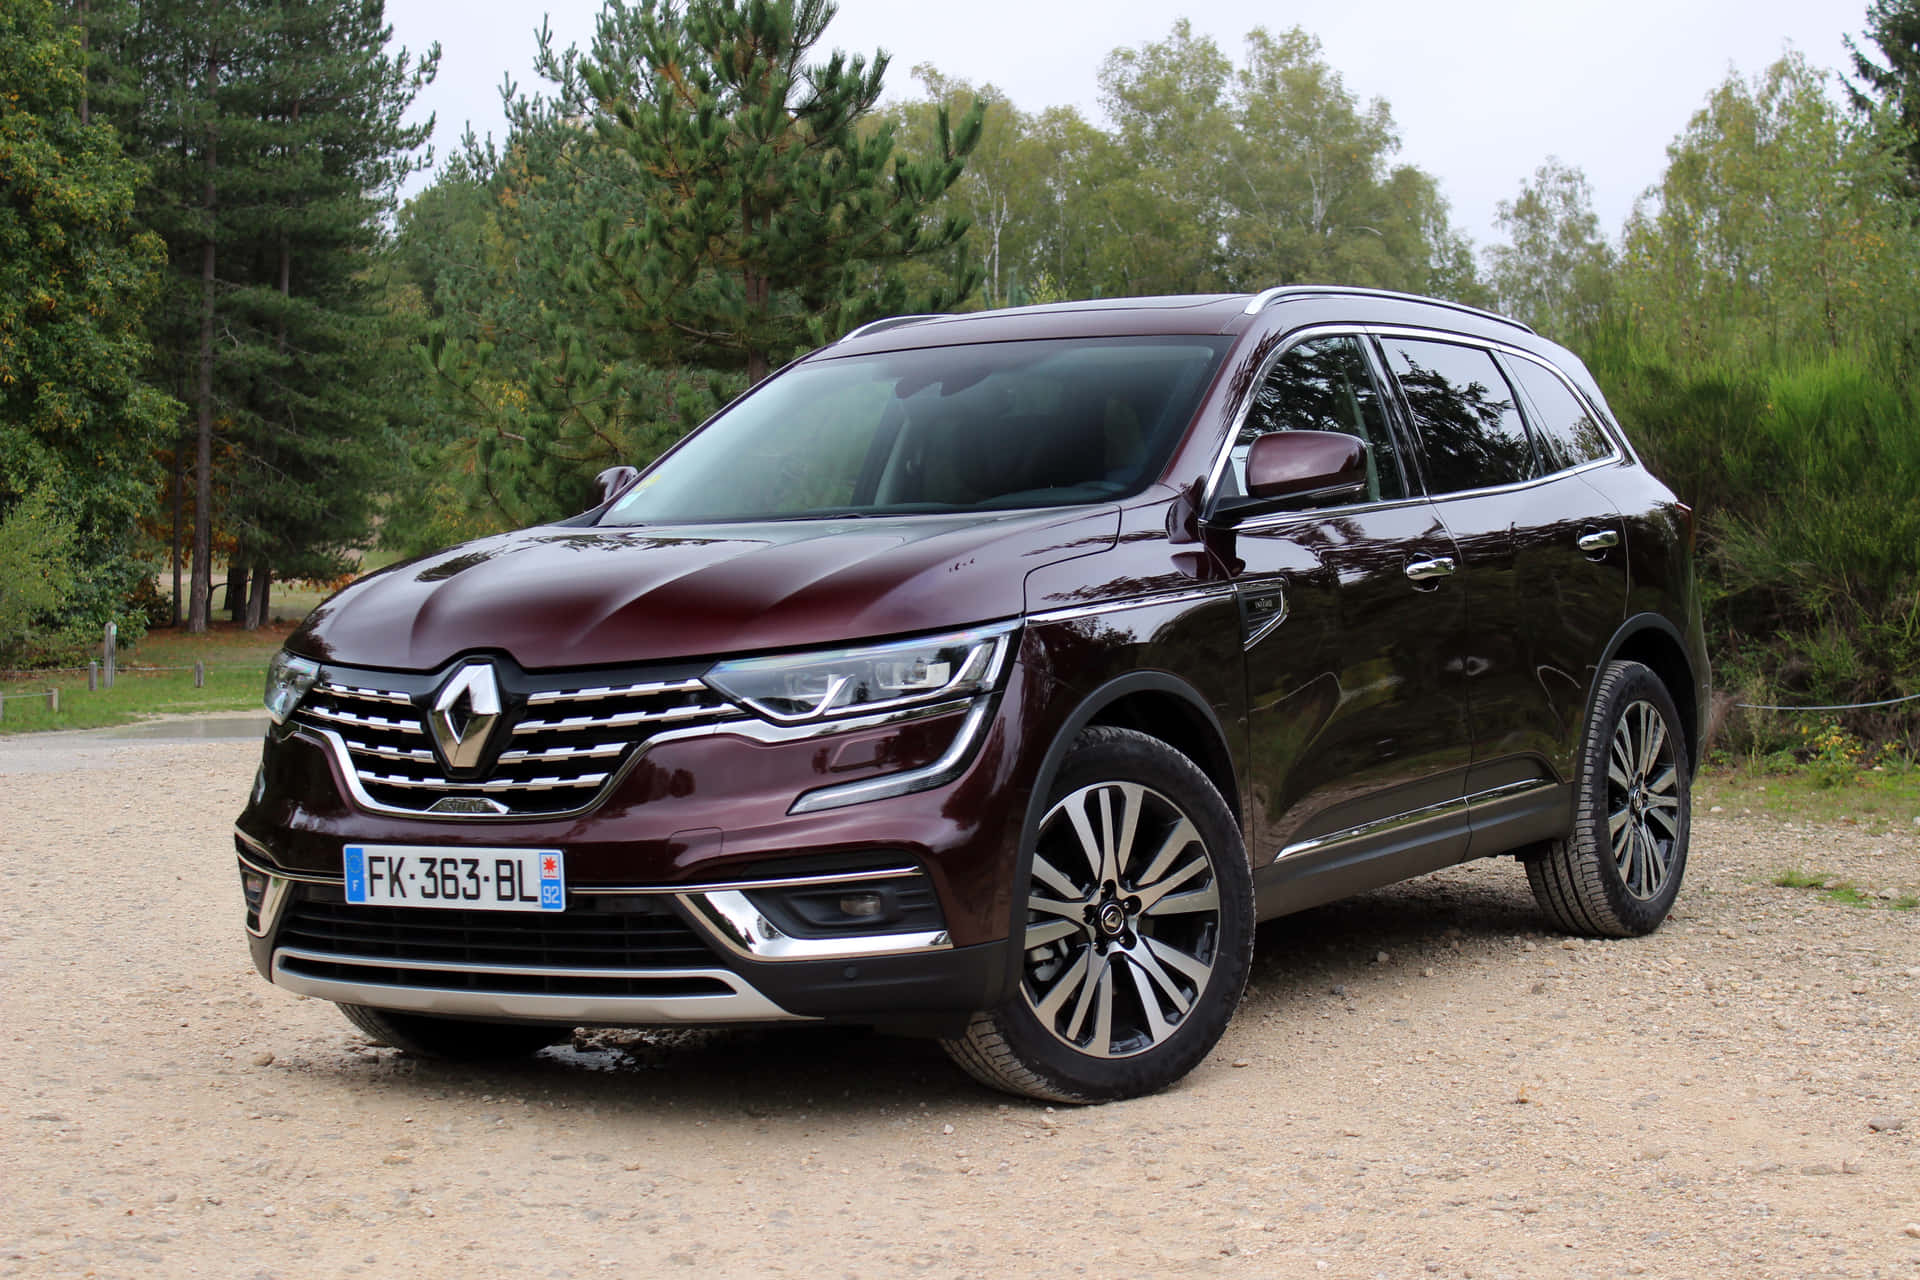 A Stunning Capture Of The Renault Koleos In Motion Wallpaper